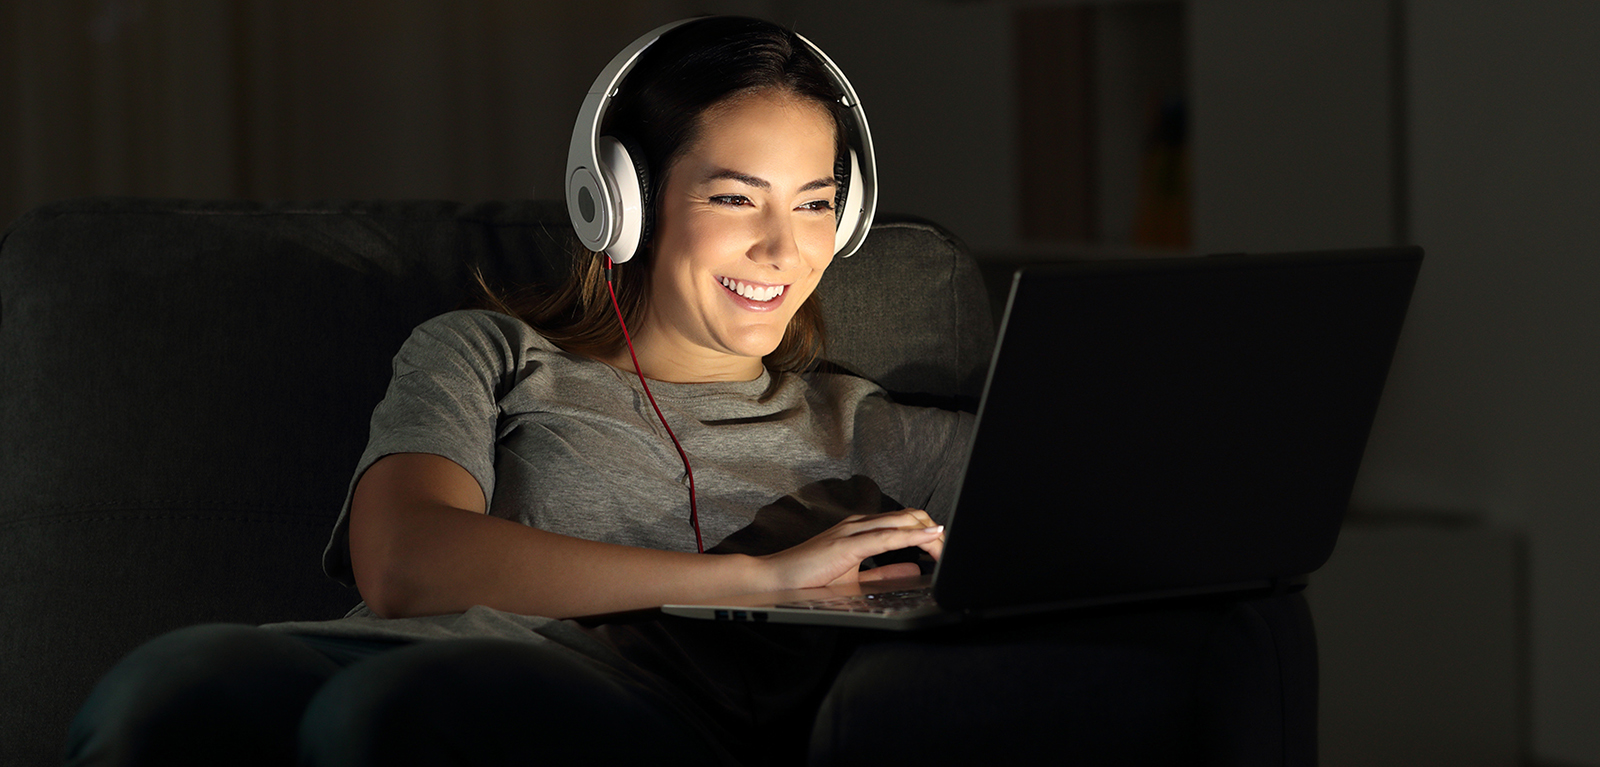 Woman with headphones and a laptop